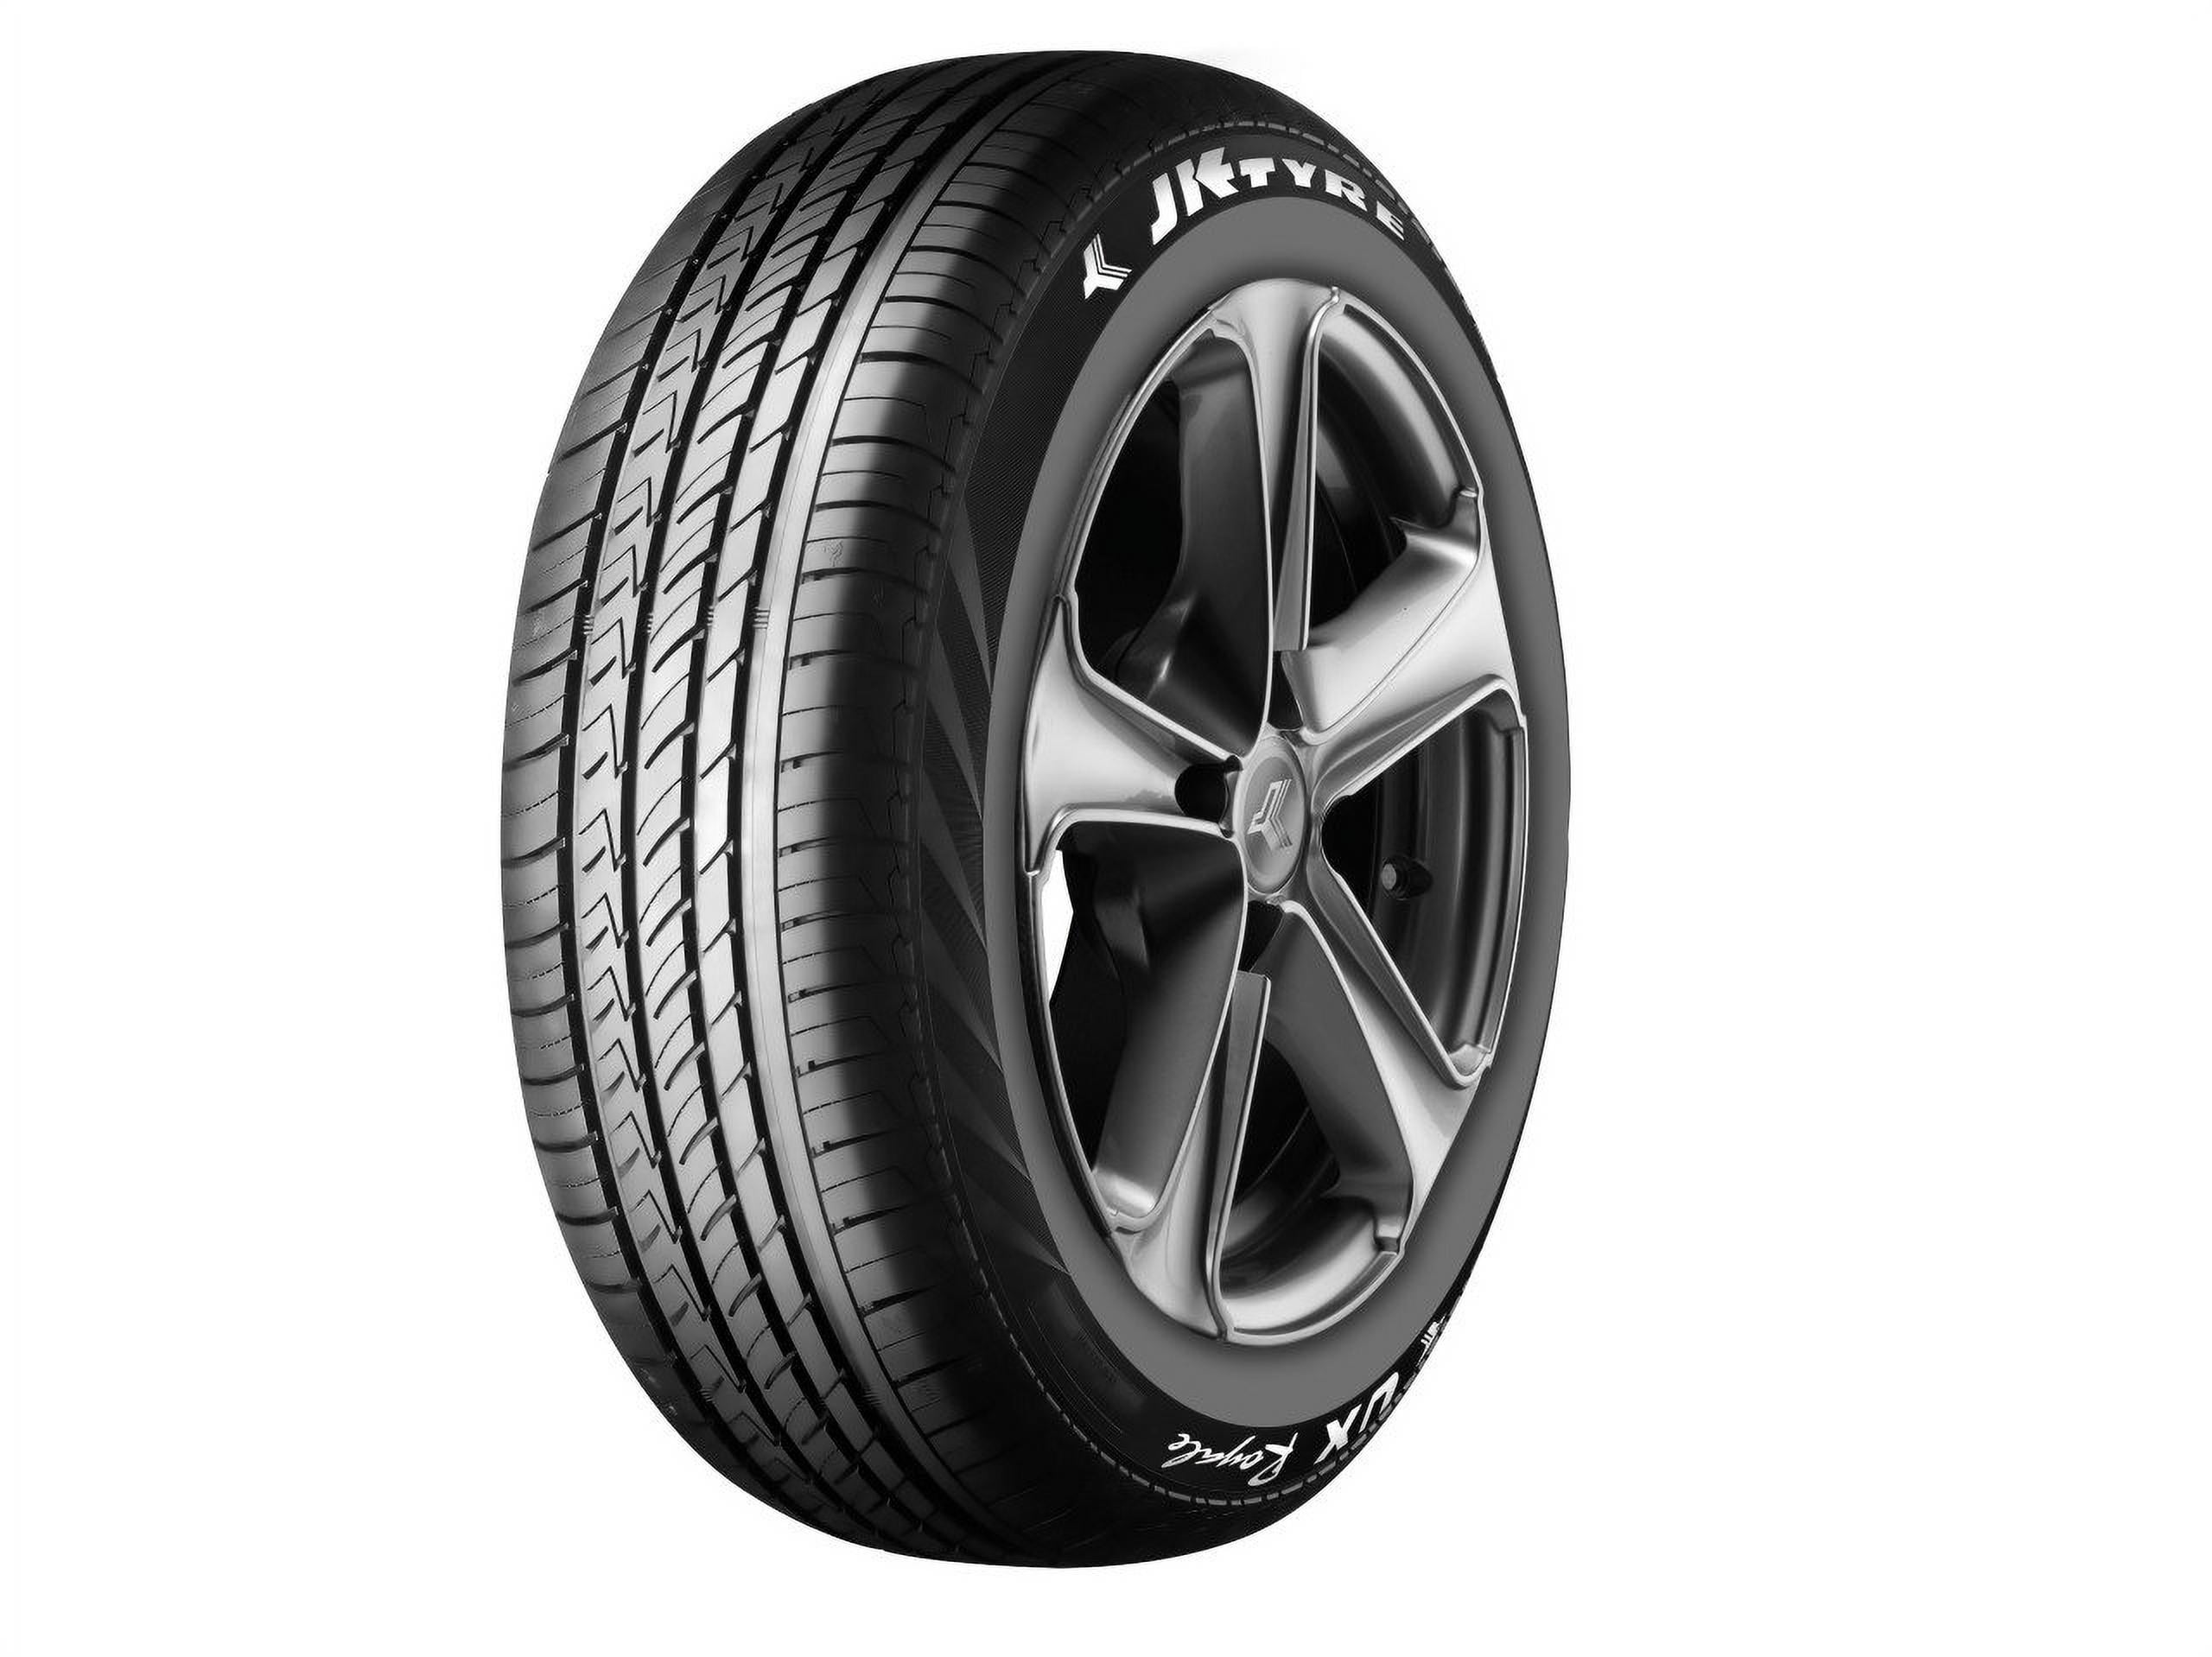 JK Tyre UX Royale All-Season Touring Radial Tire-215/60R17 215/60/17 215/60-17 96H Load Range SL 4-Ply BSW Black Side Wall 